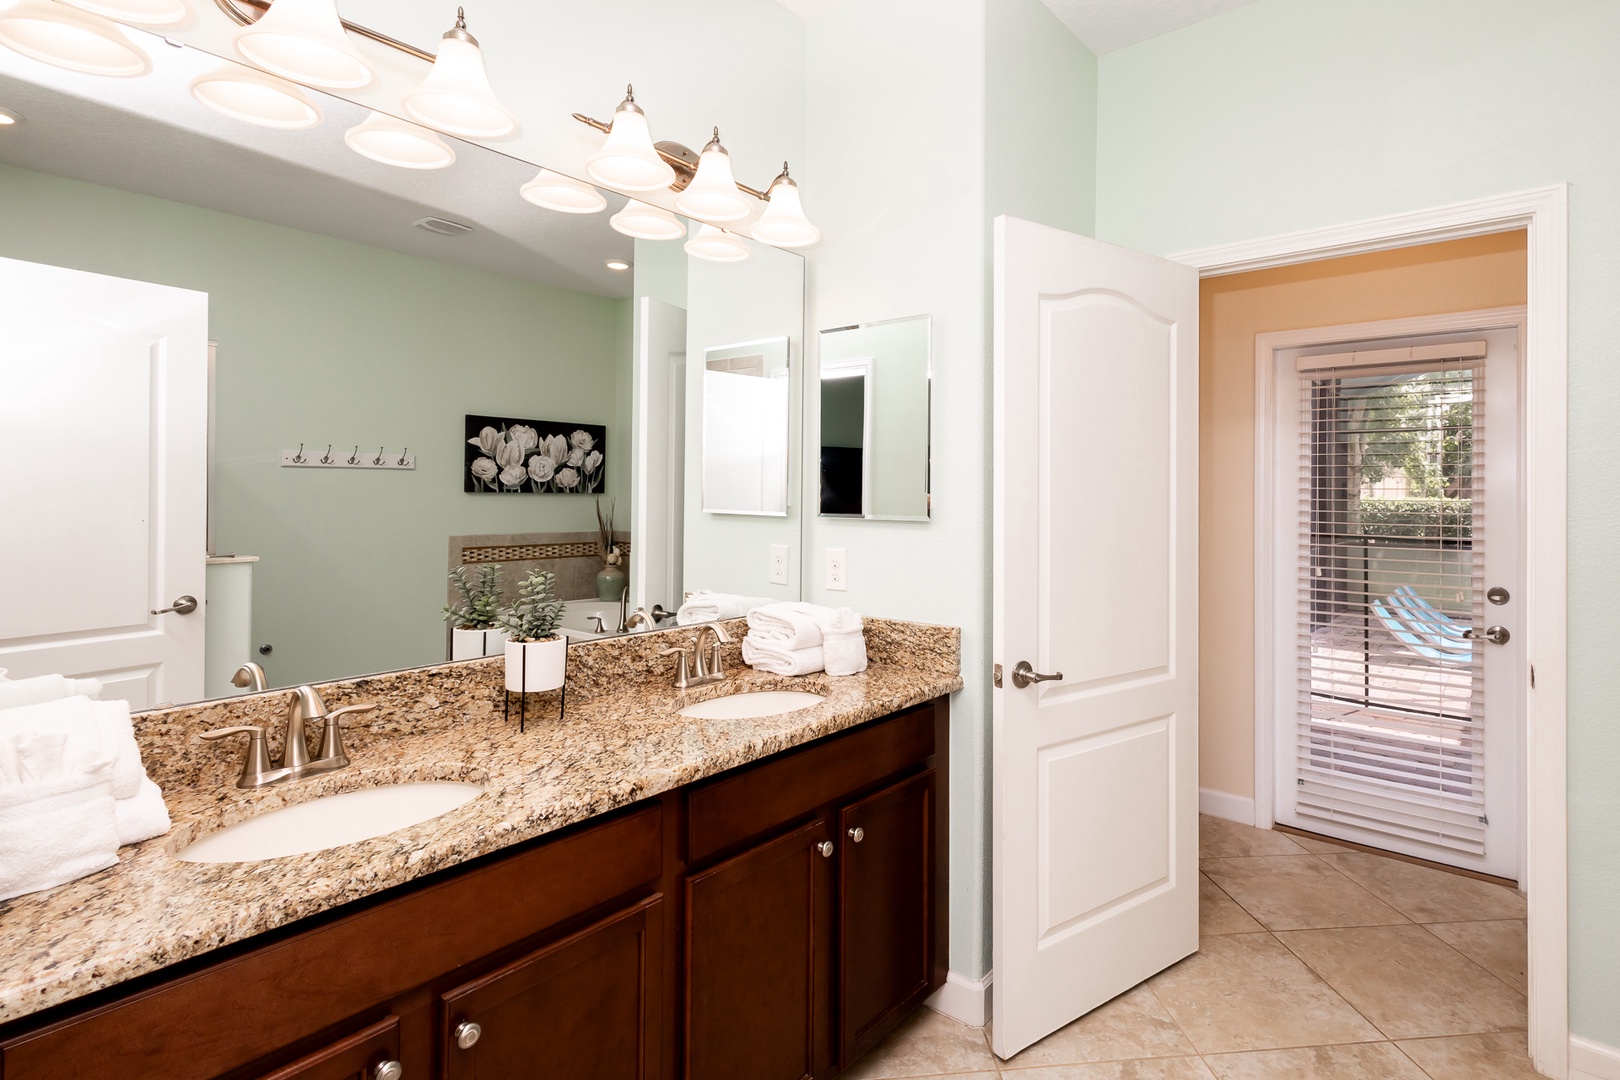 Private ensuite bathroom with dual sinks, separate shower, and soaking tub